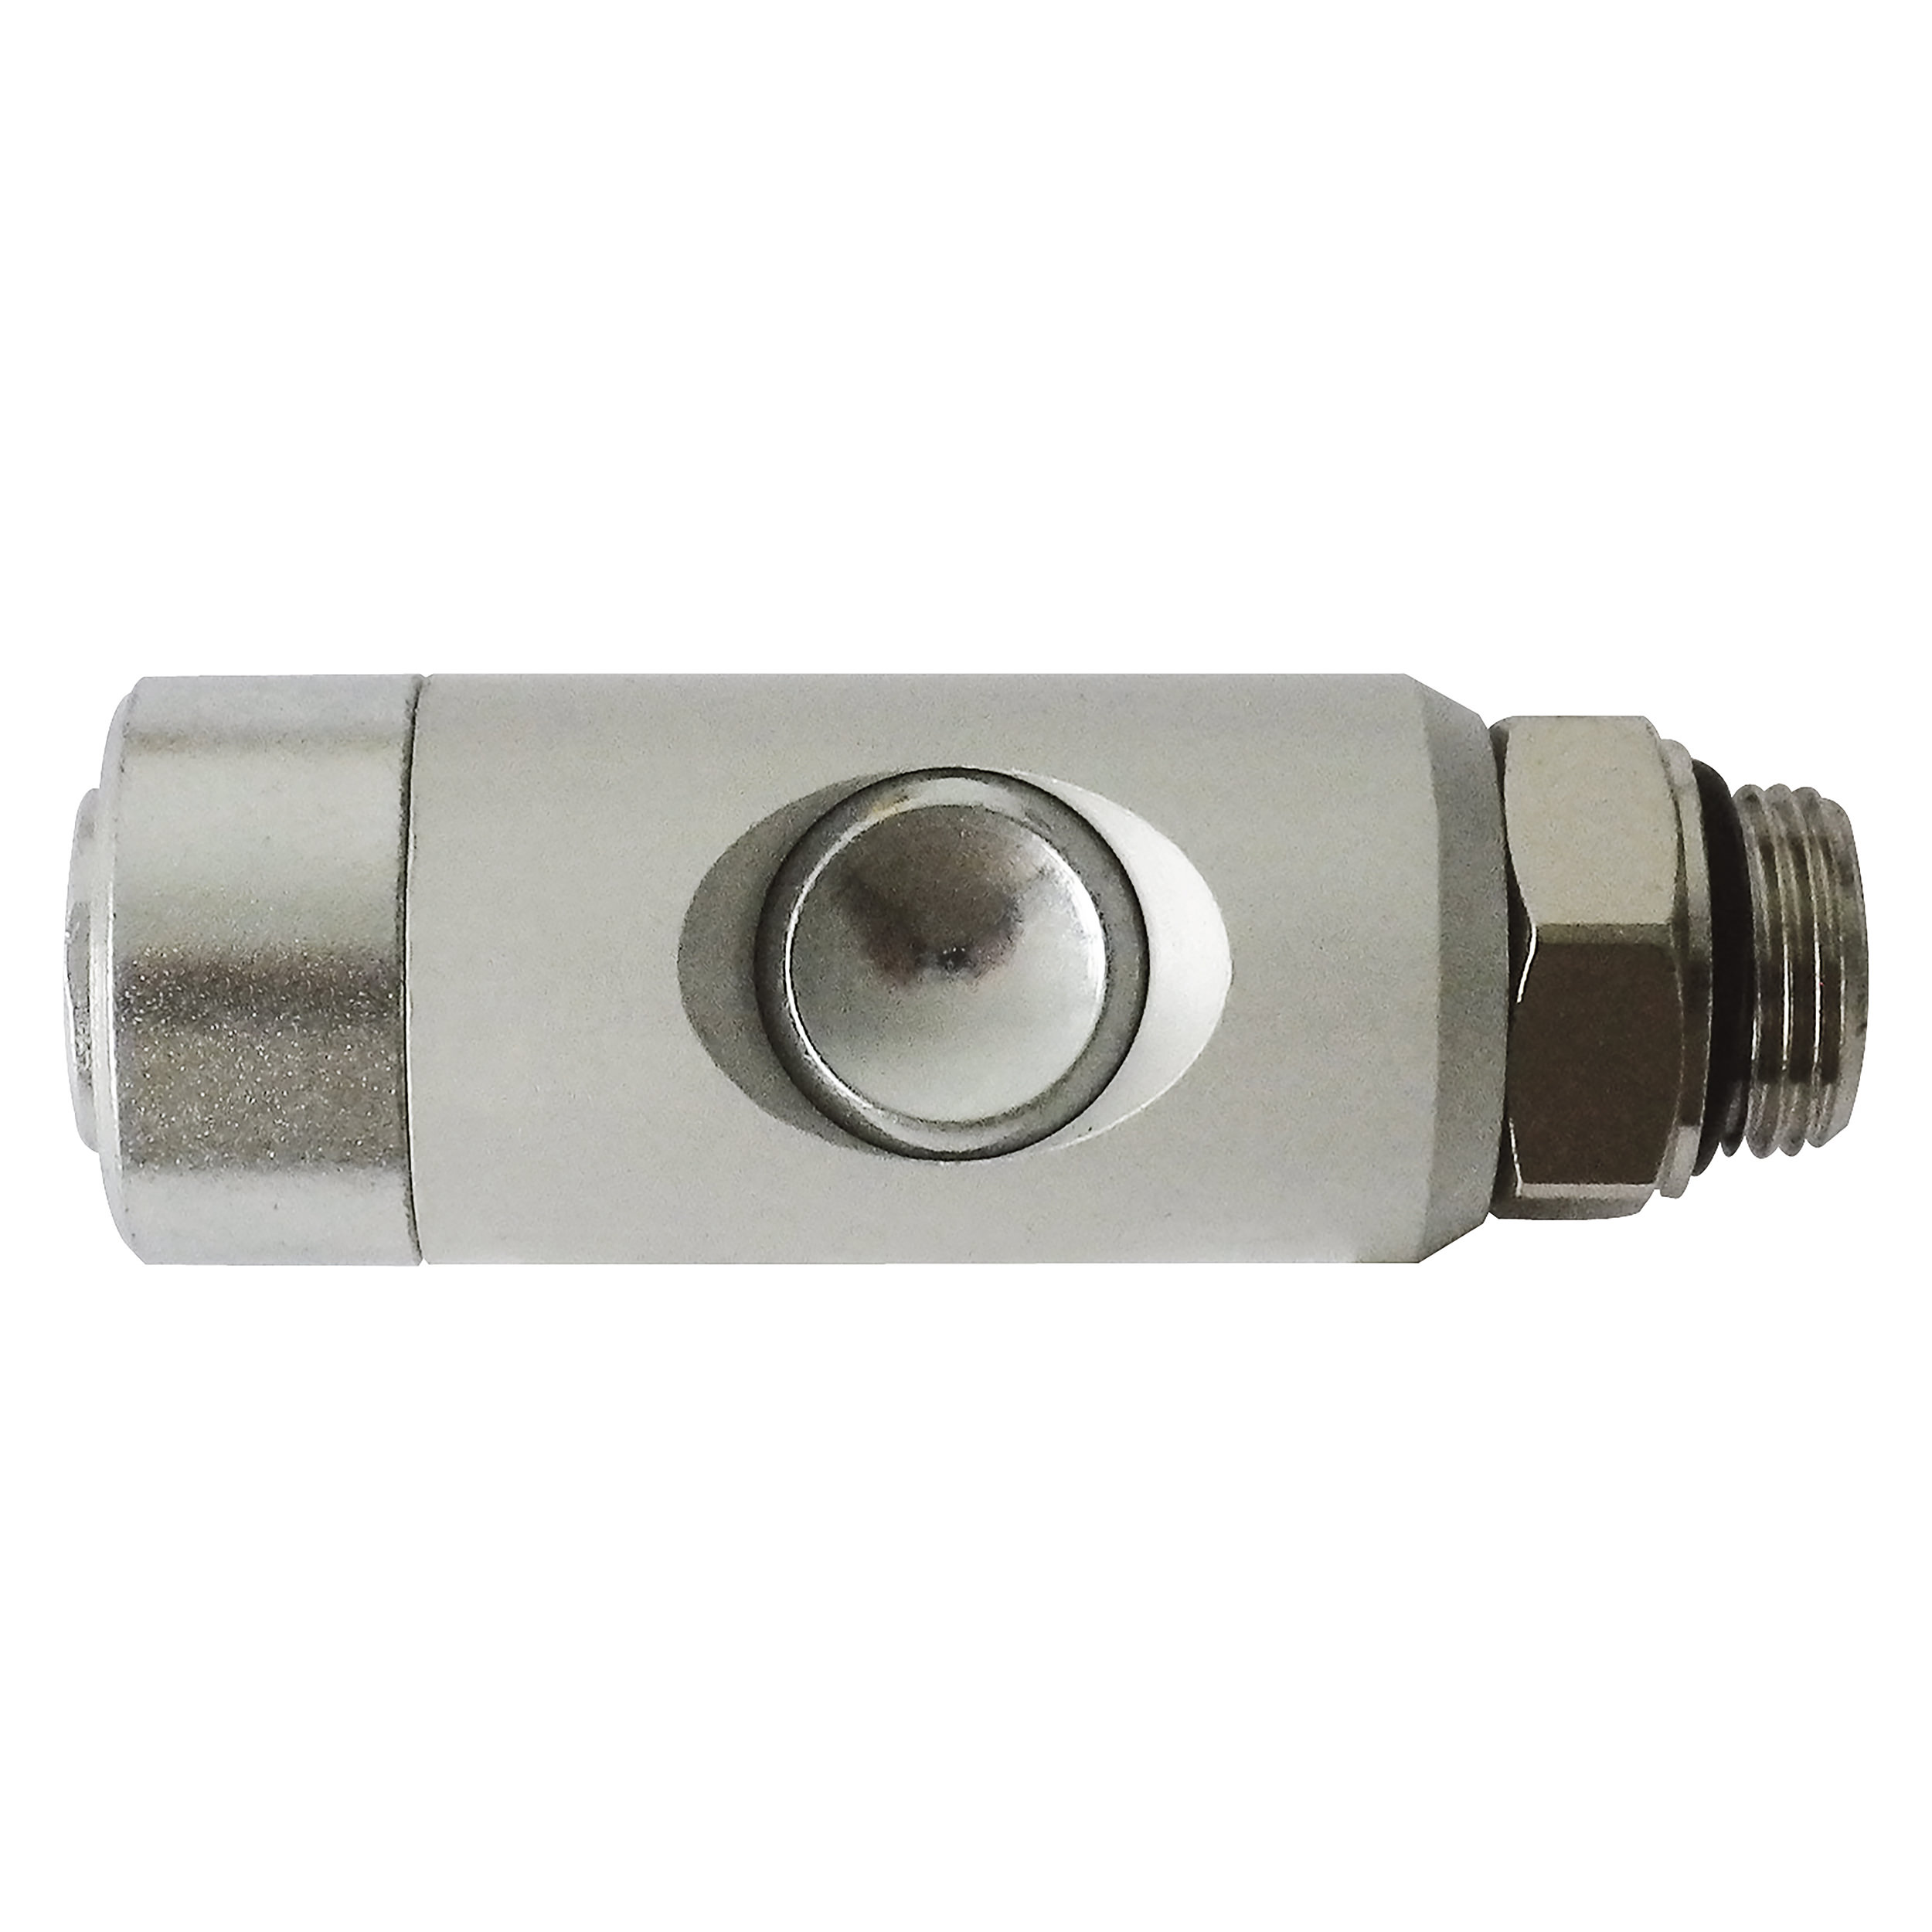 DN 5.5 safety coupling w. ARO profile, w. push button, QN: 1,000 Nl/min, MOP: 145 psi, G¼ male, length: 76 mm, AF 20